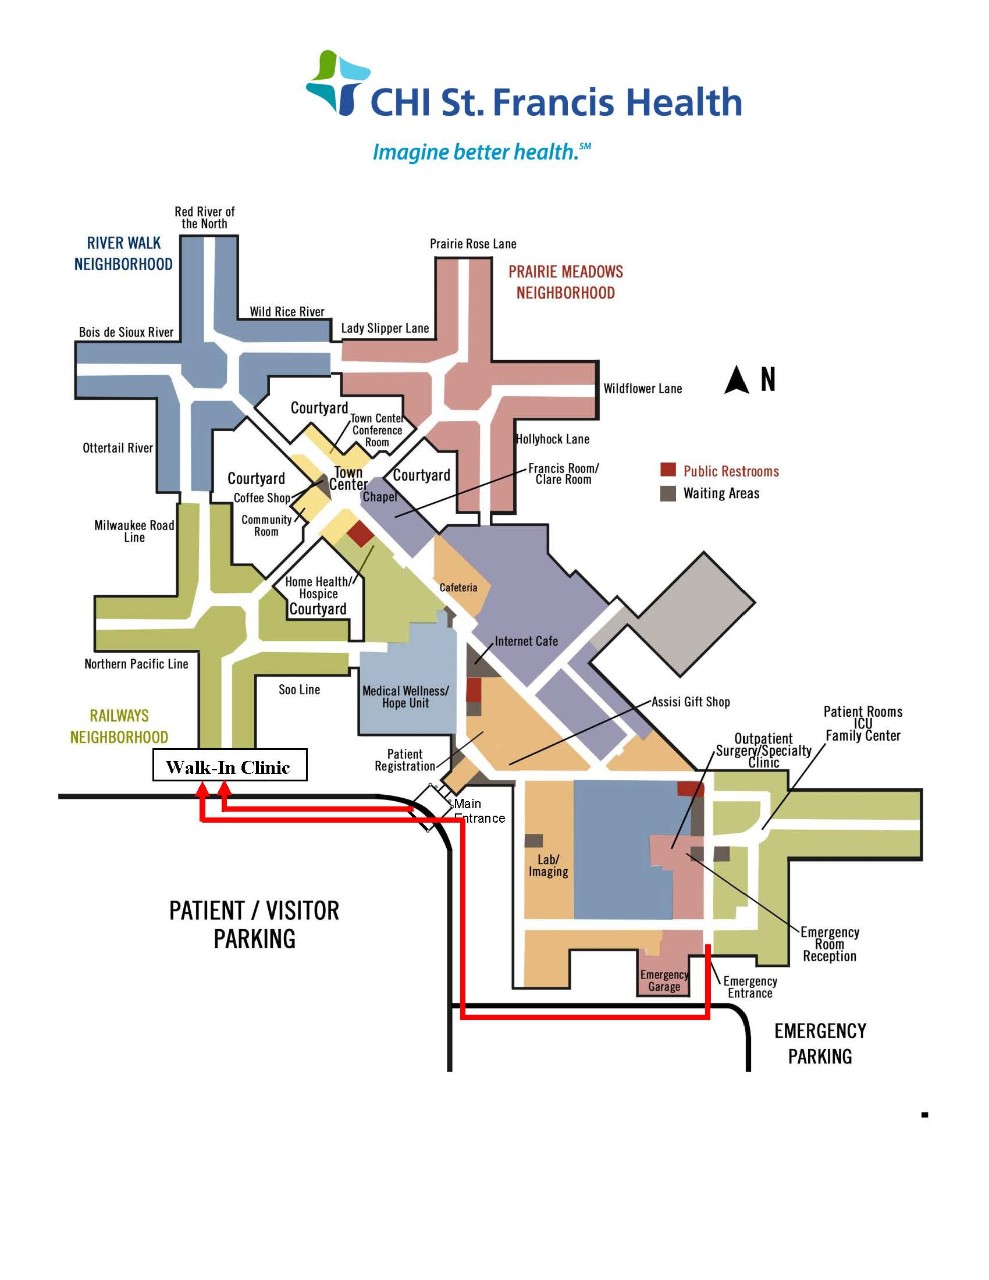 CHI St. Francis Health campus map